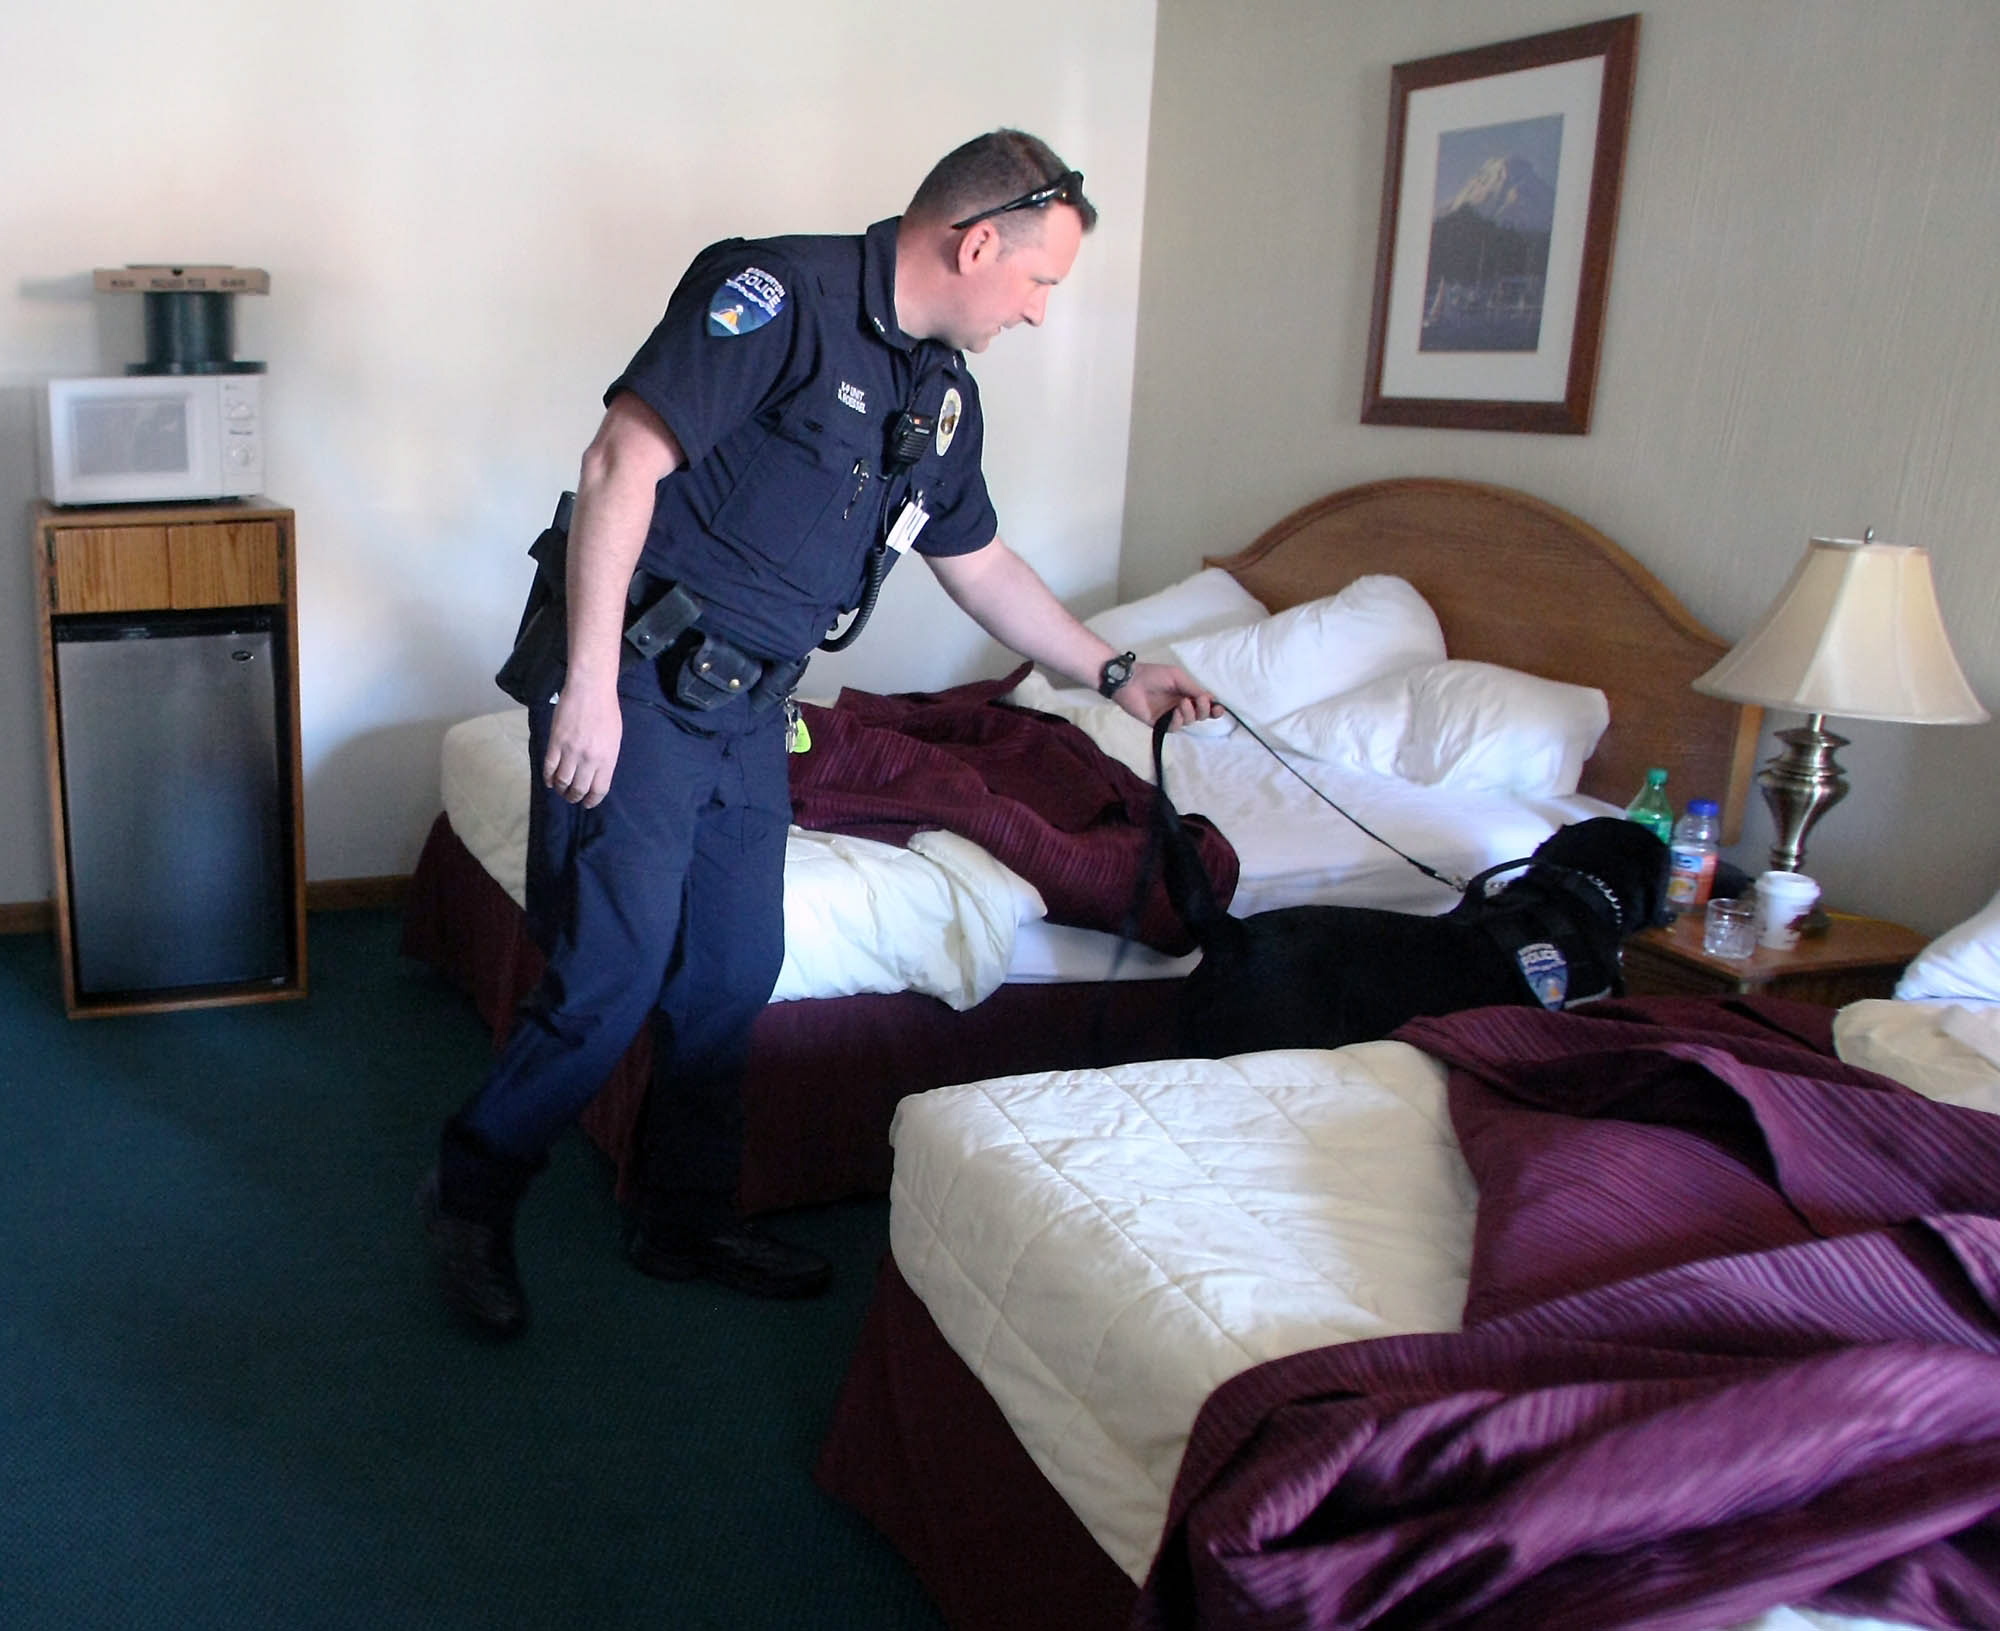 Bremerton Police Officer Duke Roessel and his dog Dusty search a room at the Quality Inn in Bremerton during a training exercise.